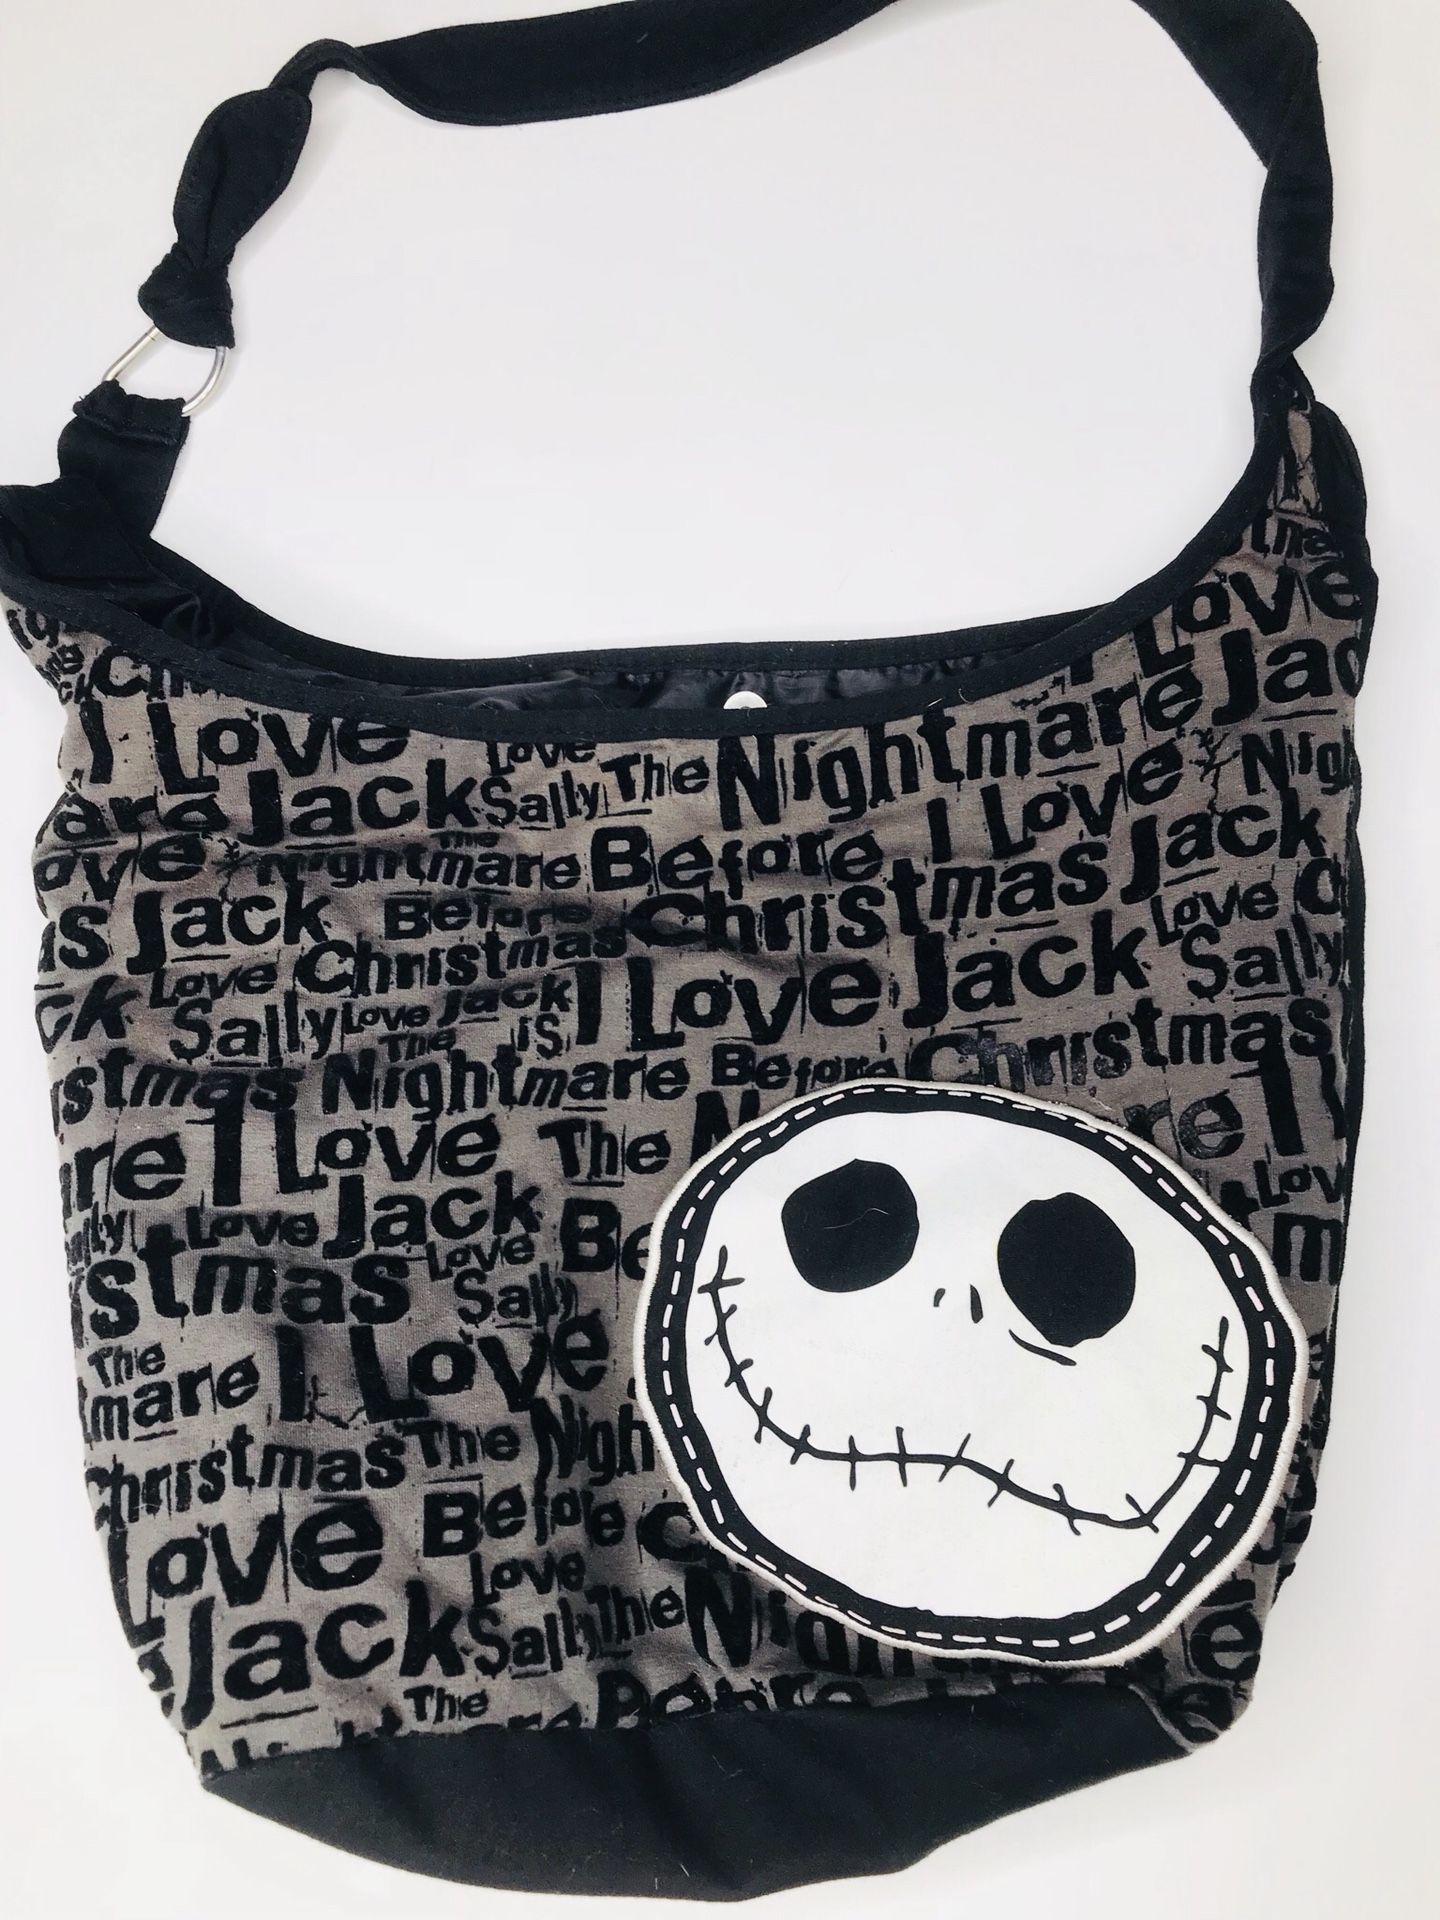 Nightmare before Christmas button Tote bag purse